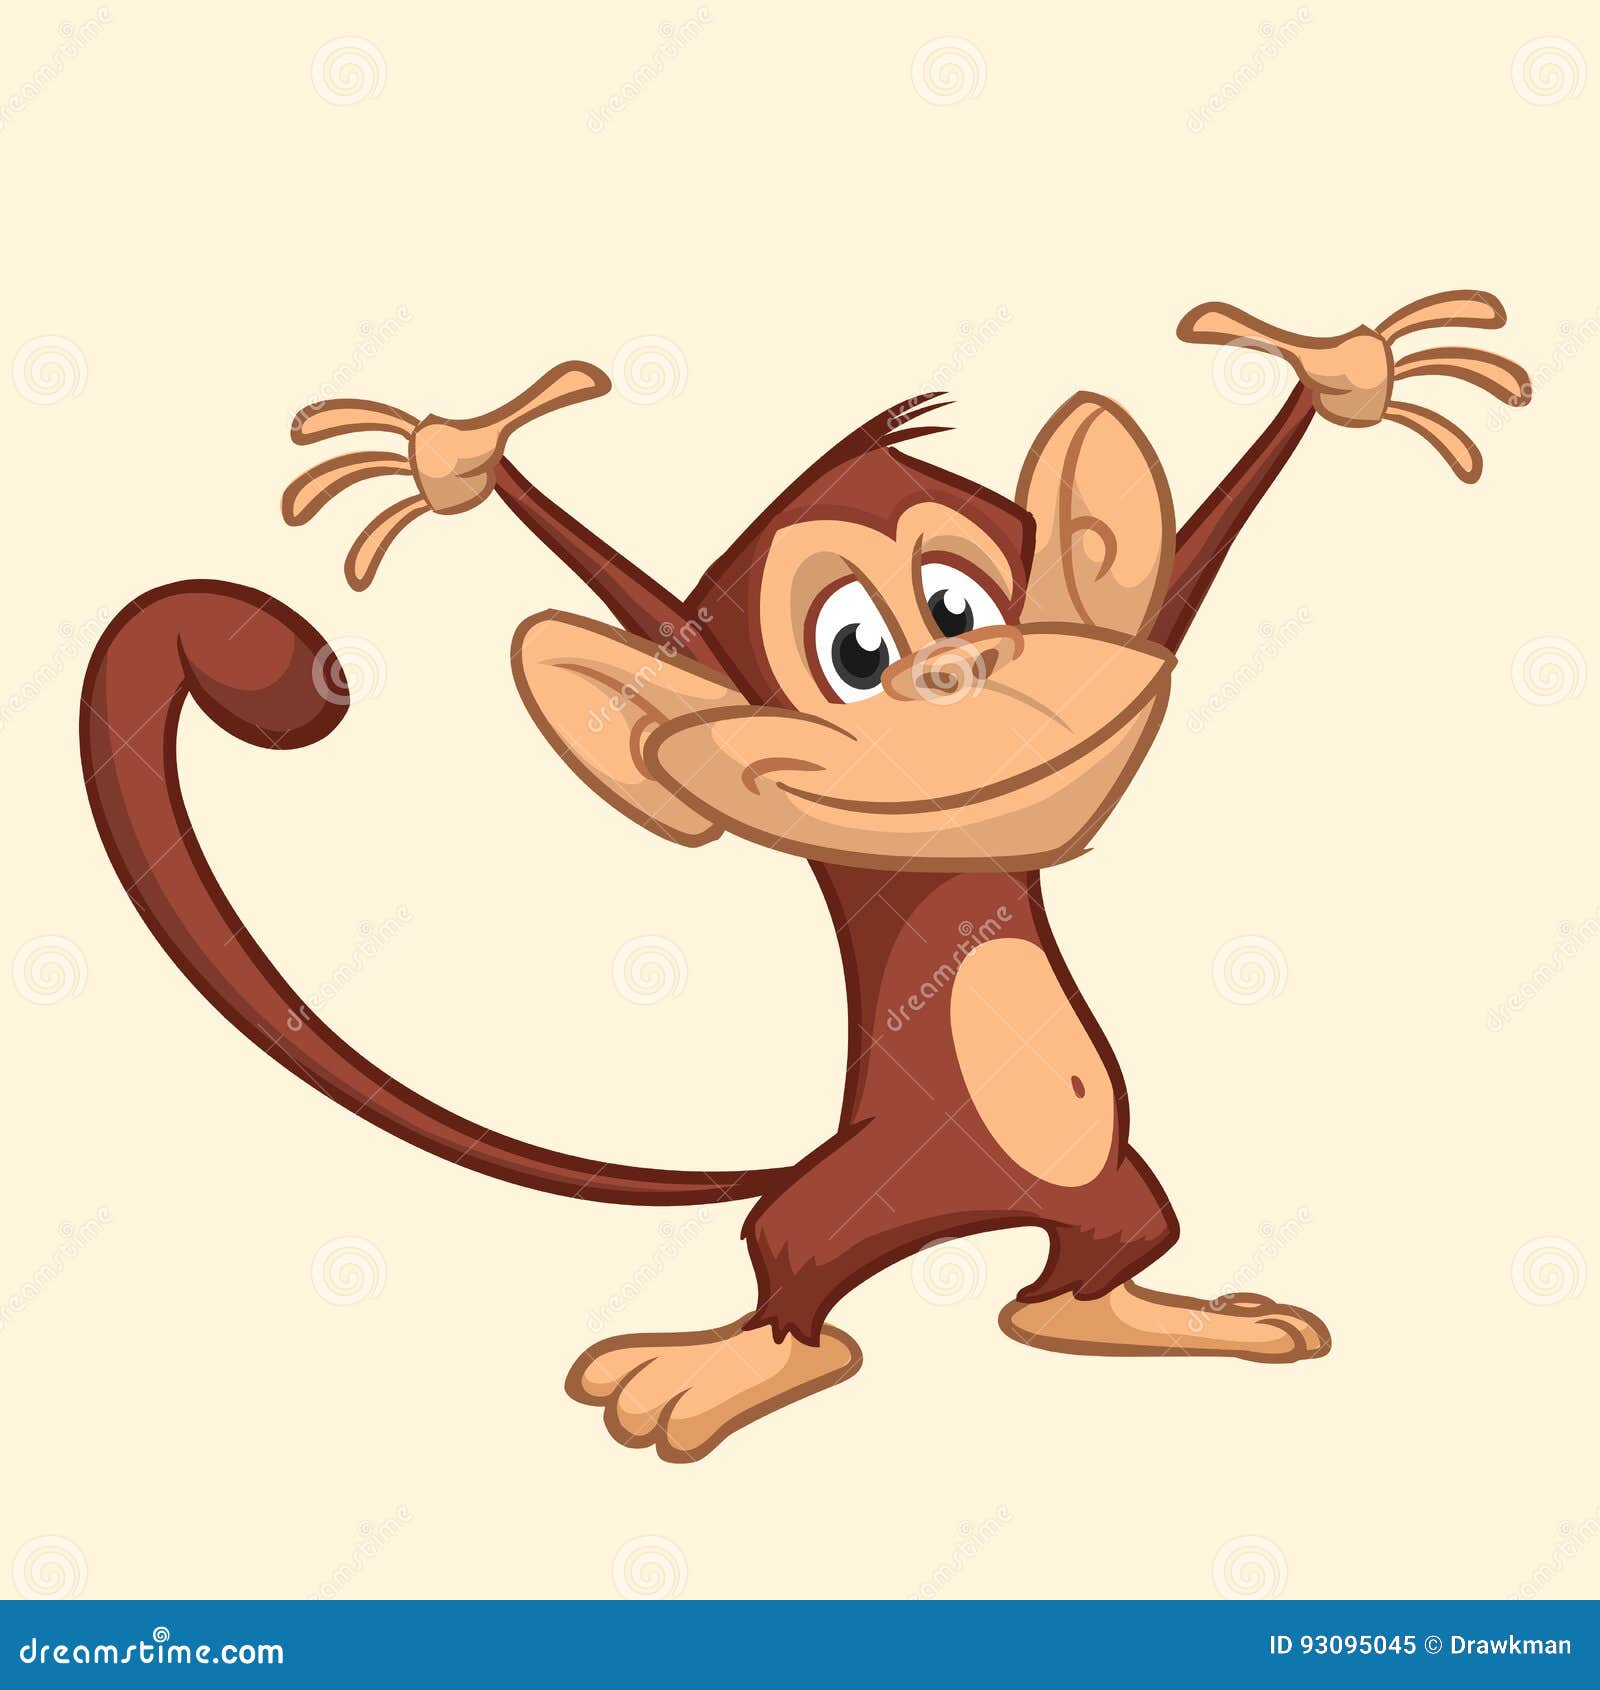 Learn How to Draw a Cute Monkey Cartoon Zoo Animals Step by Step  Drawing  Tutorials